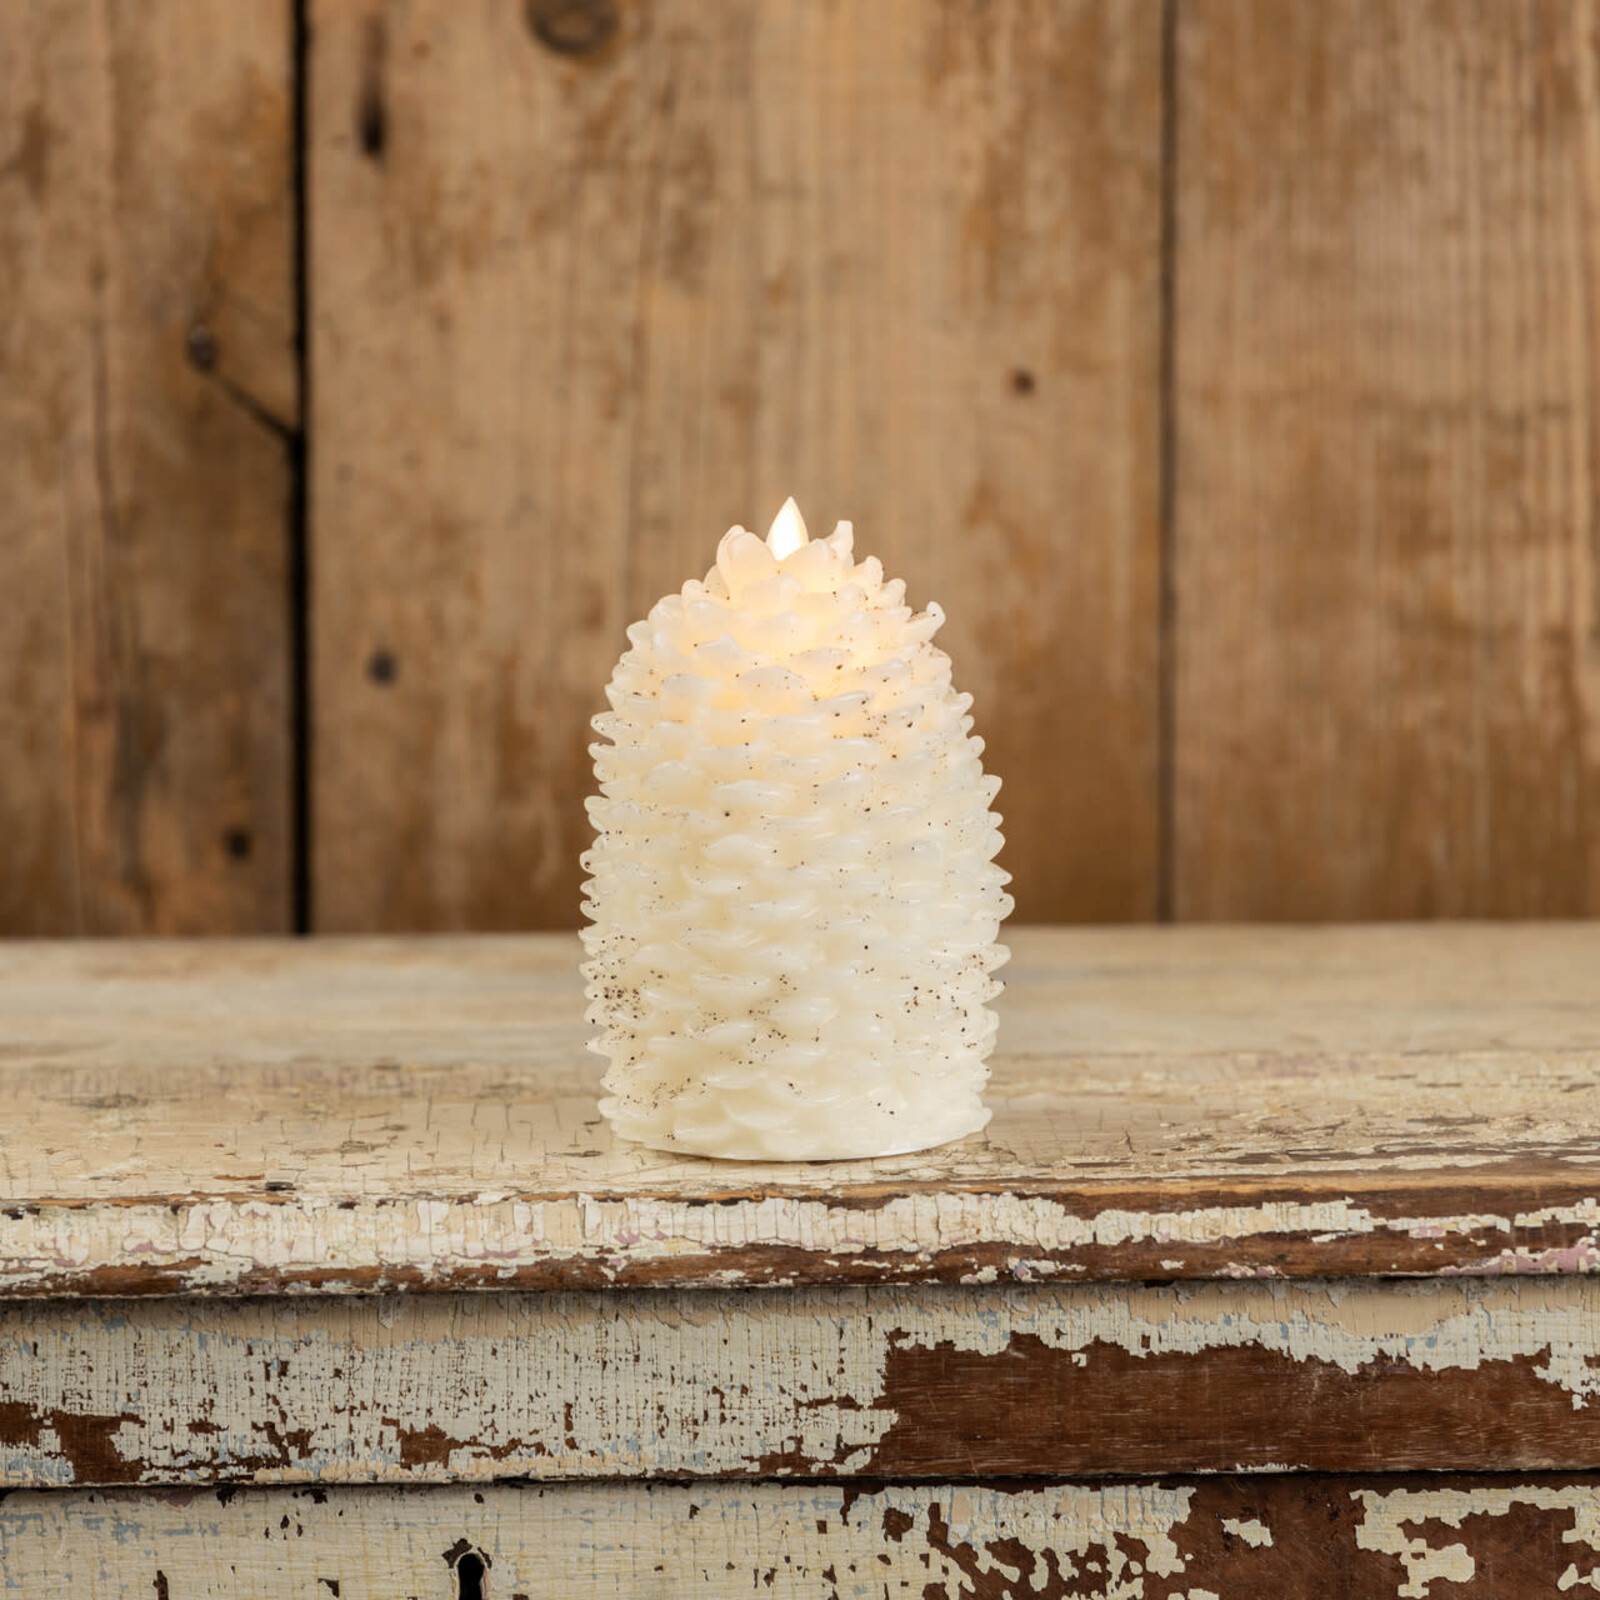 Ragon House 6" MOVING FLAME PINECONE CANDLE   NY213024 loading=